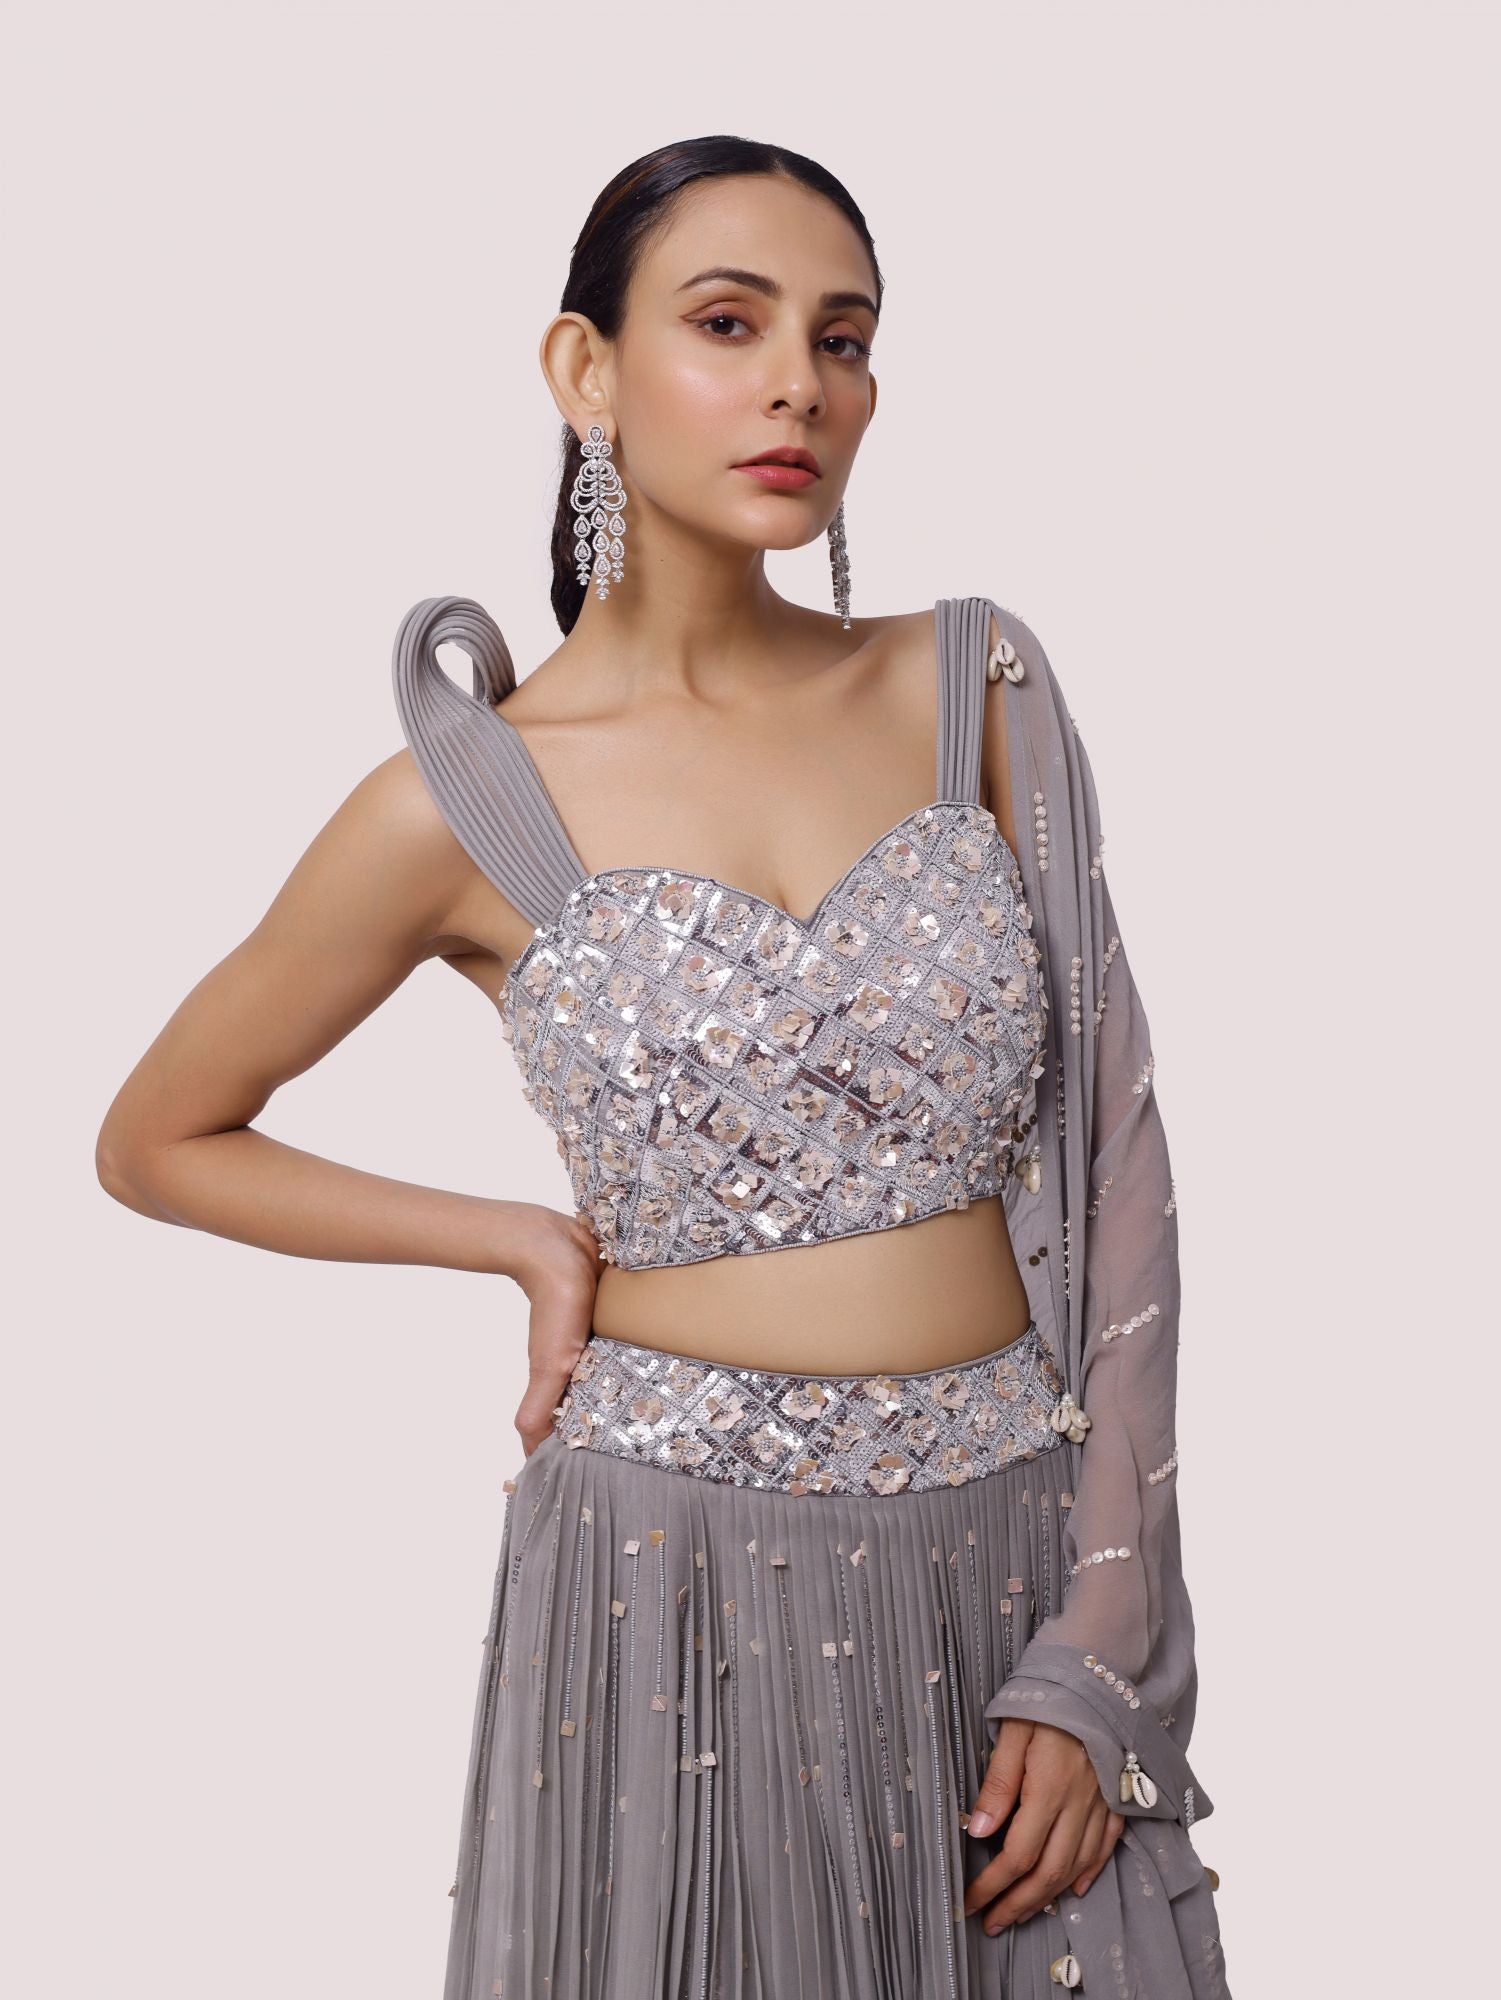 Buy a beautiful grey strappy sleeves lehenga featuring mirror work. The lehenga is perfect for weddings, and sangeet parties. Shop online from Pure Elegance.